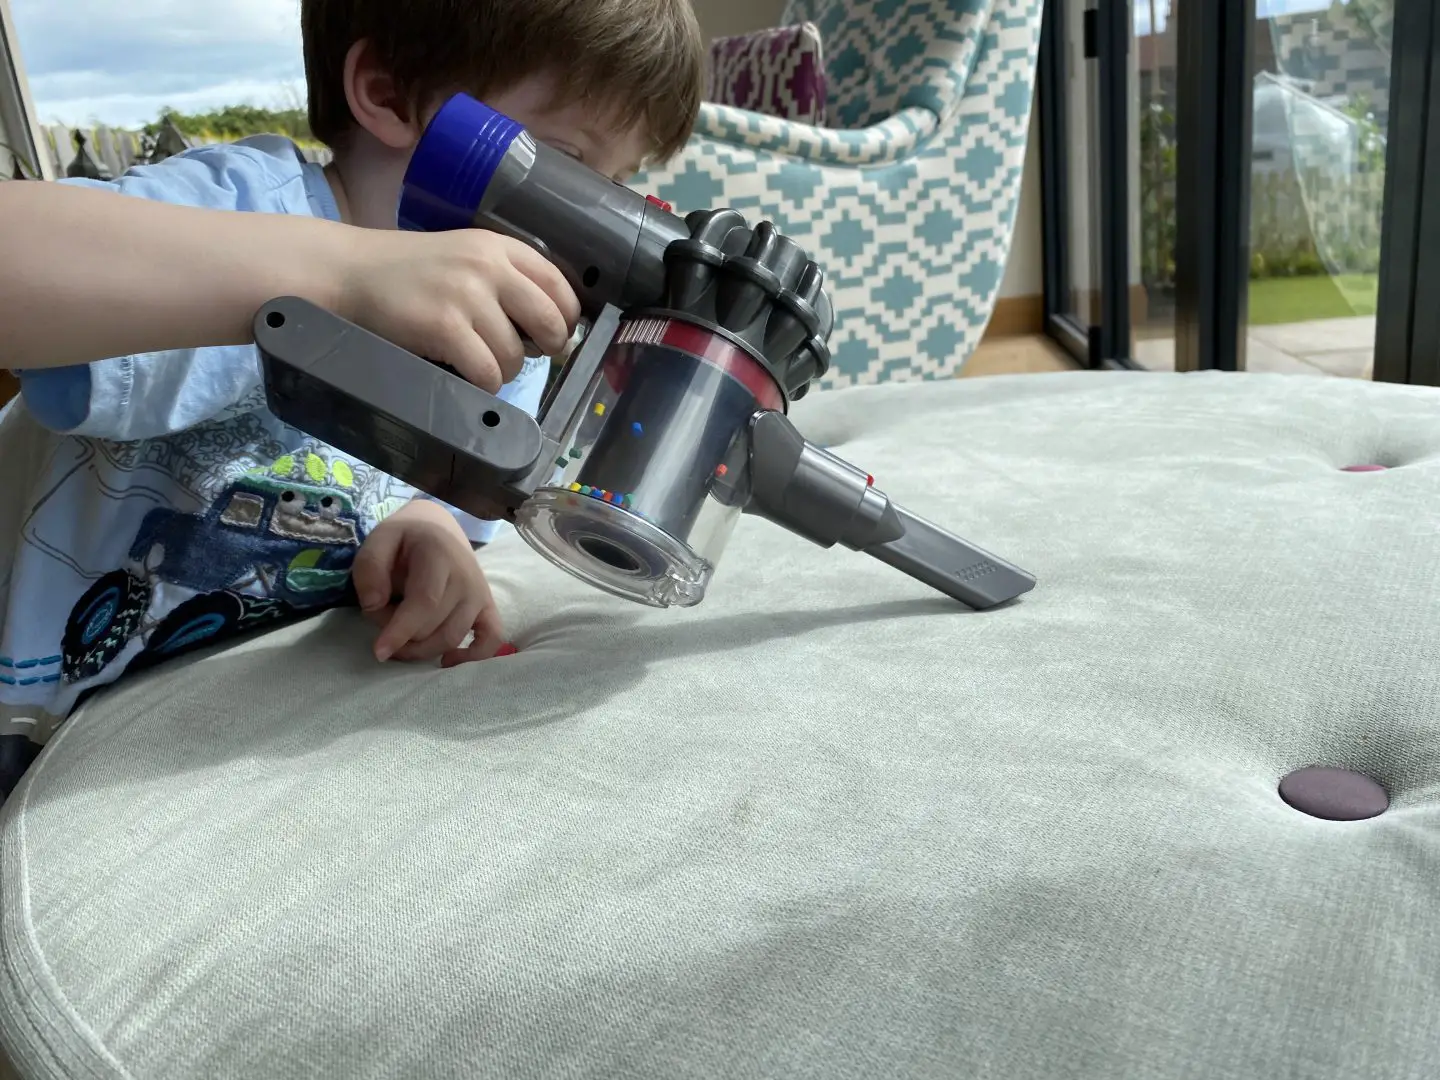 A boy hoovering a seat with a toy cordless vacuum cleaner